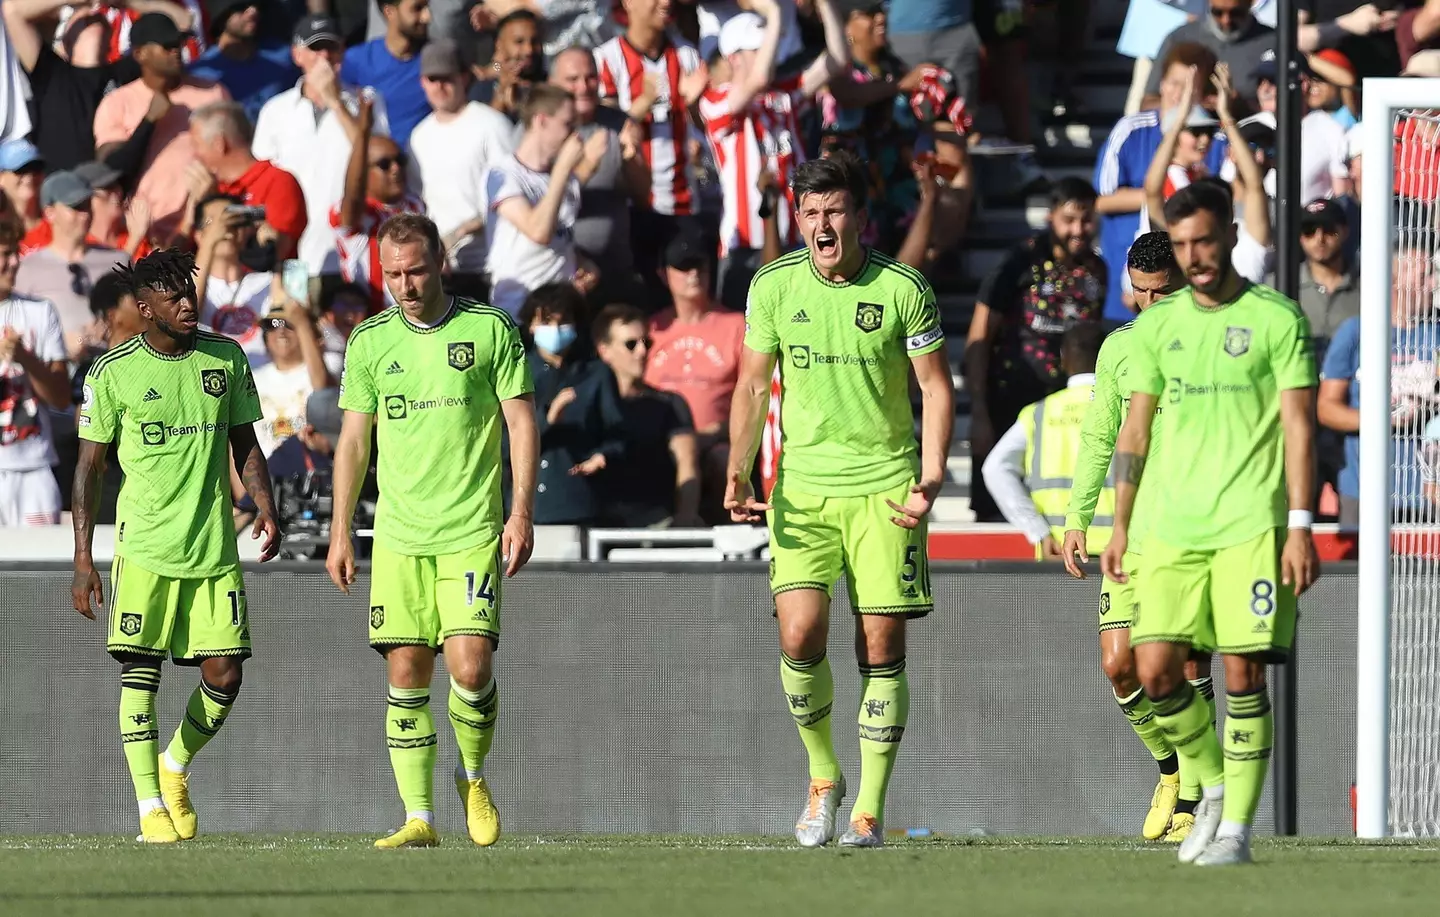 Maguire shouts at his teammates during United's 4-0 defeat to Brentford earlier this month. (Image